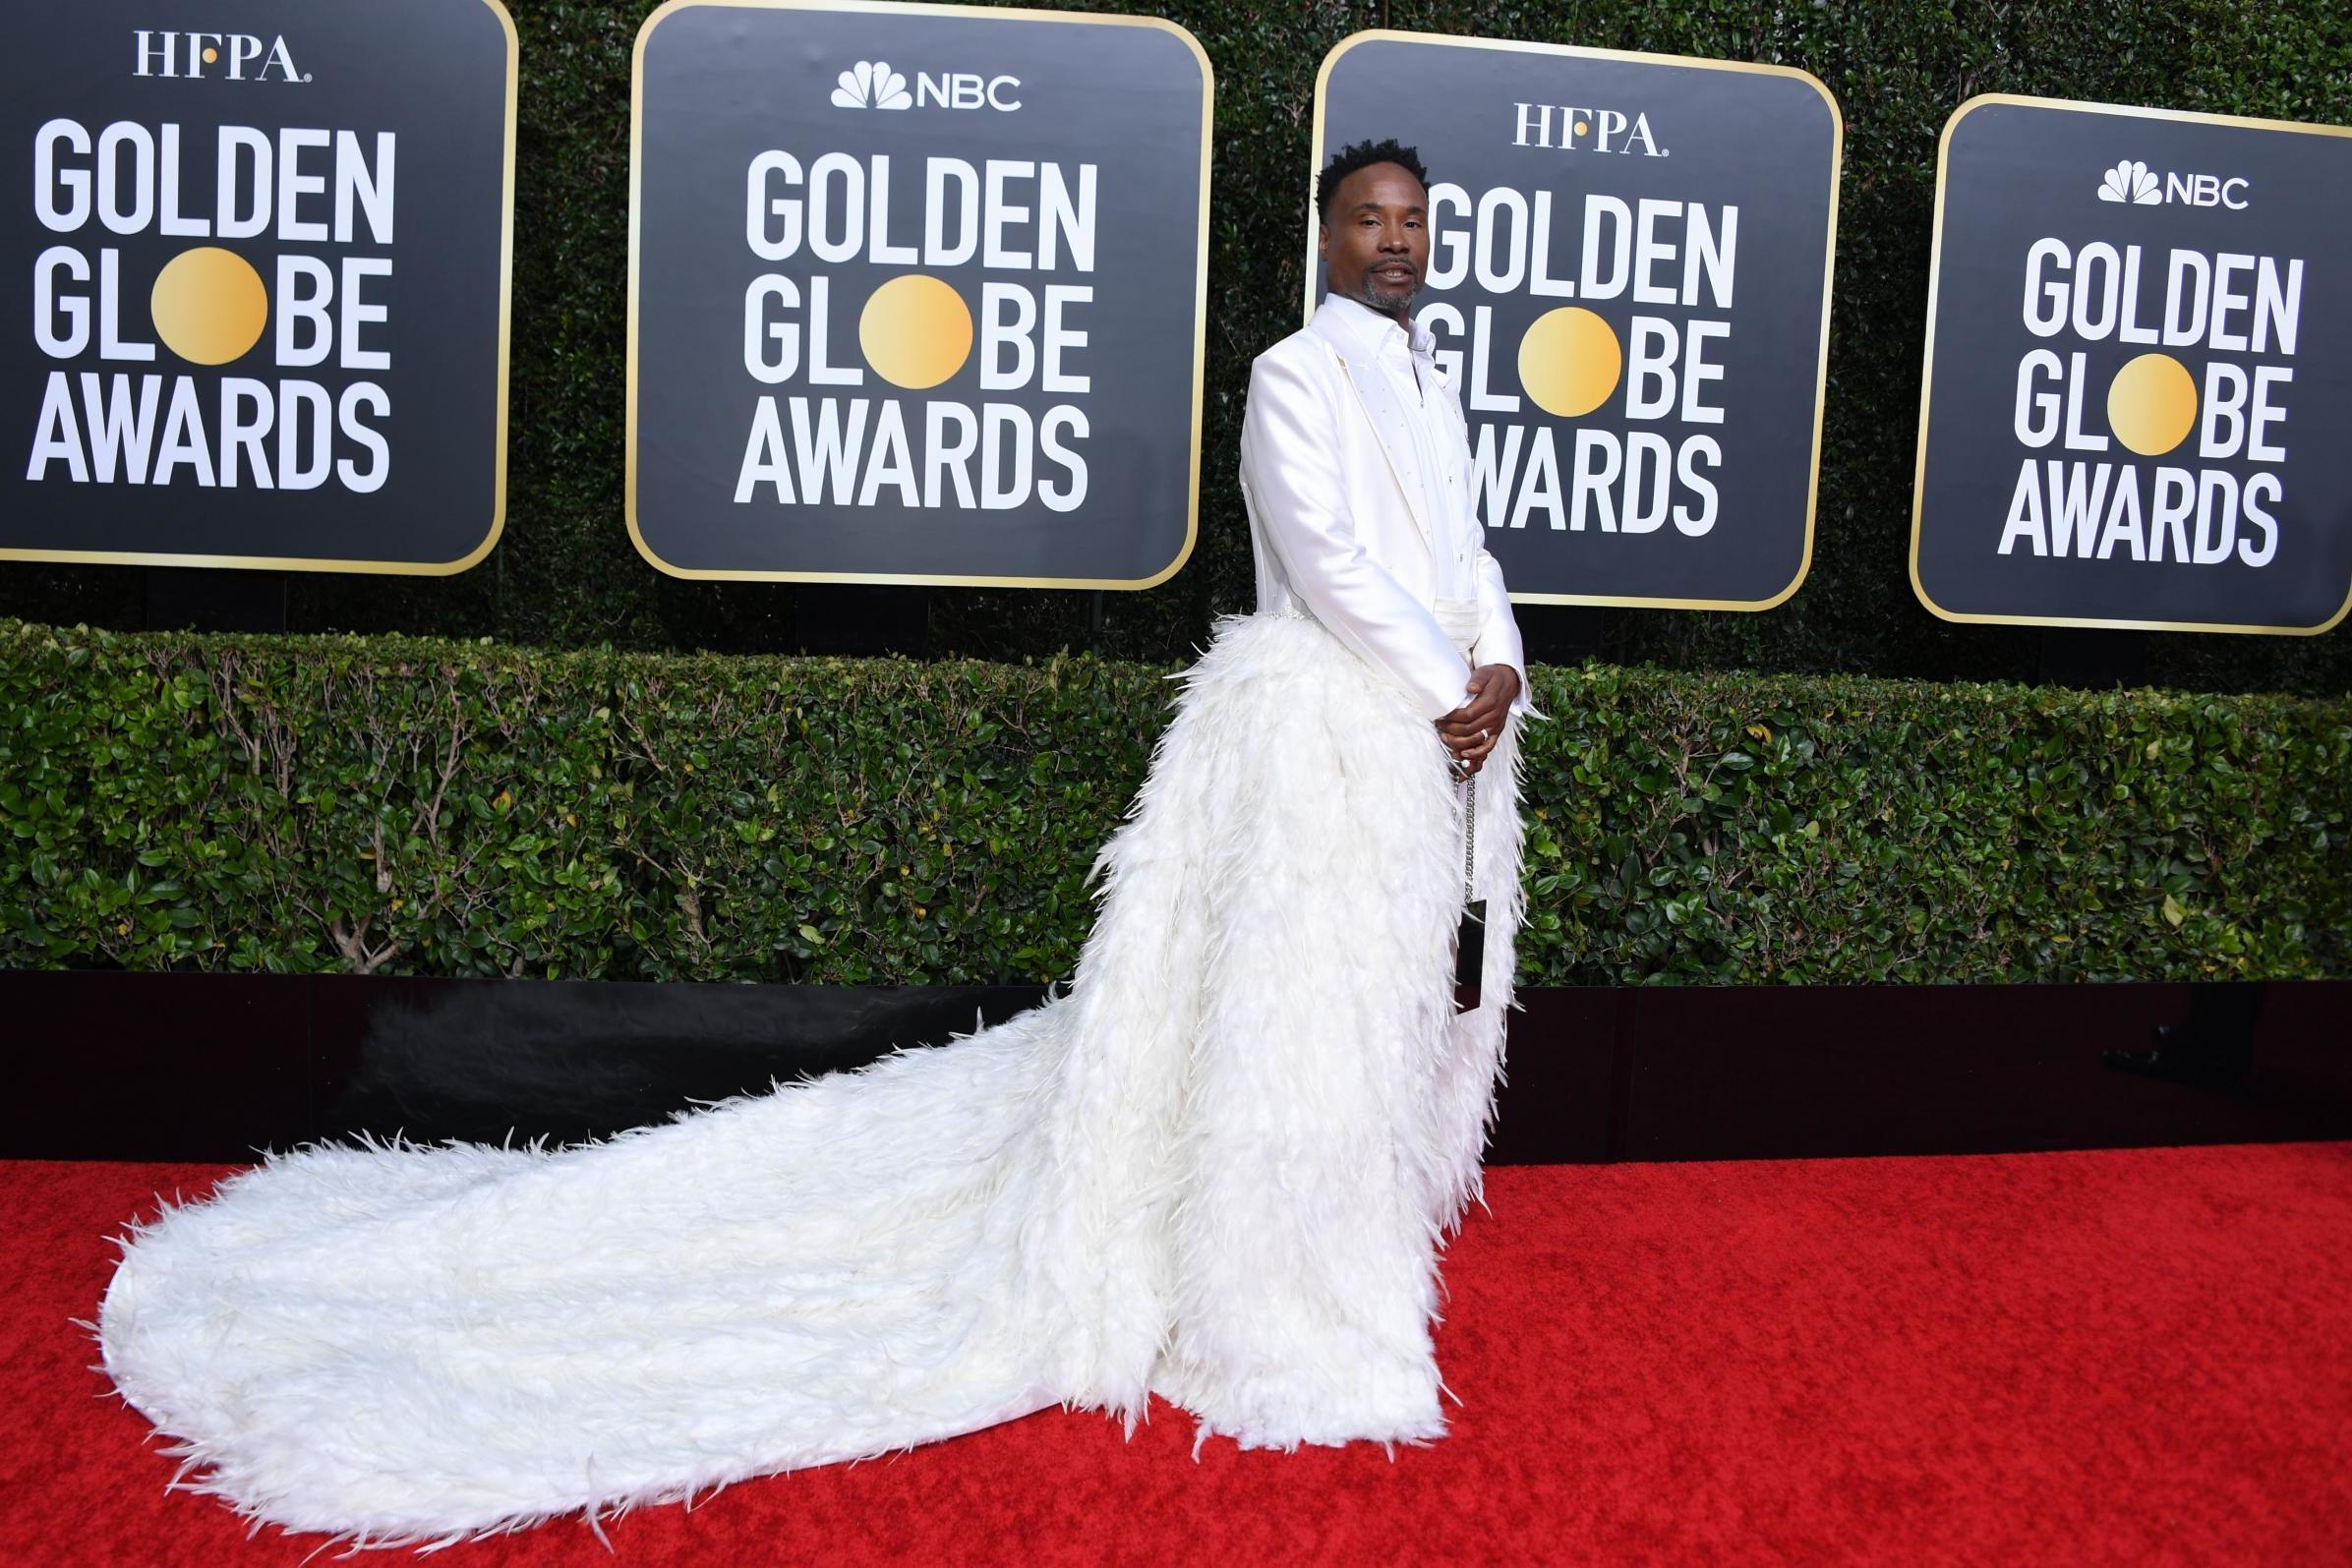 Golden Globes Billy Porter walks red carpet in feathered outfit The